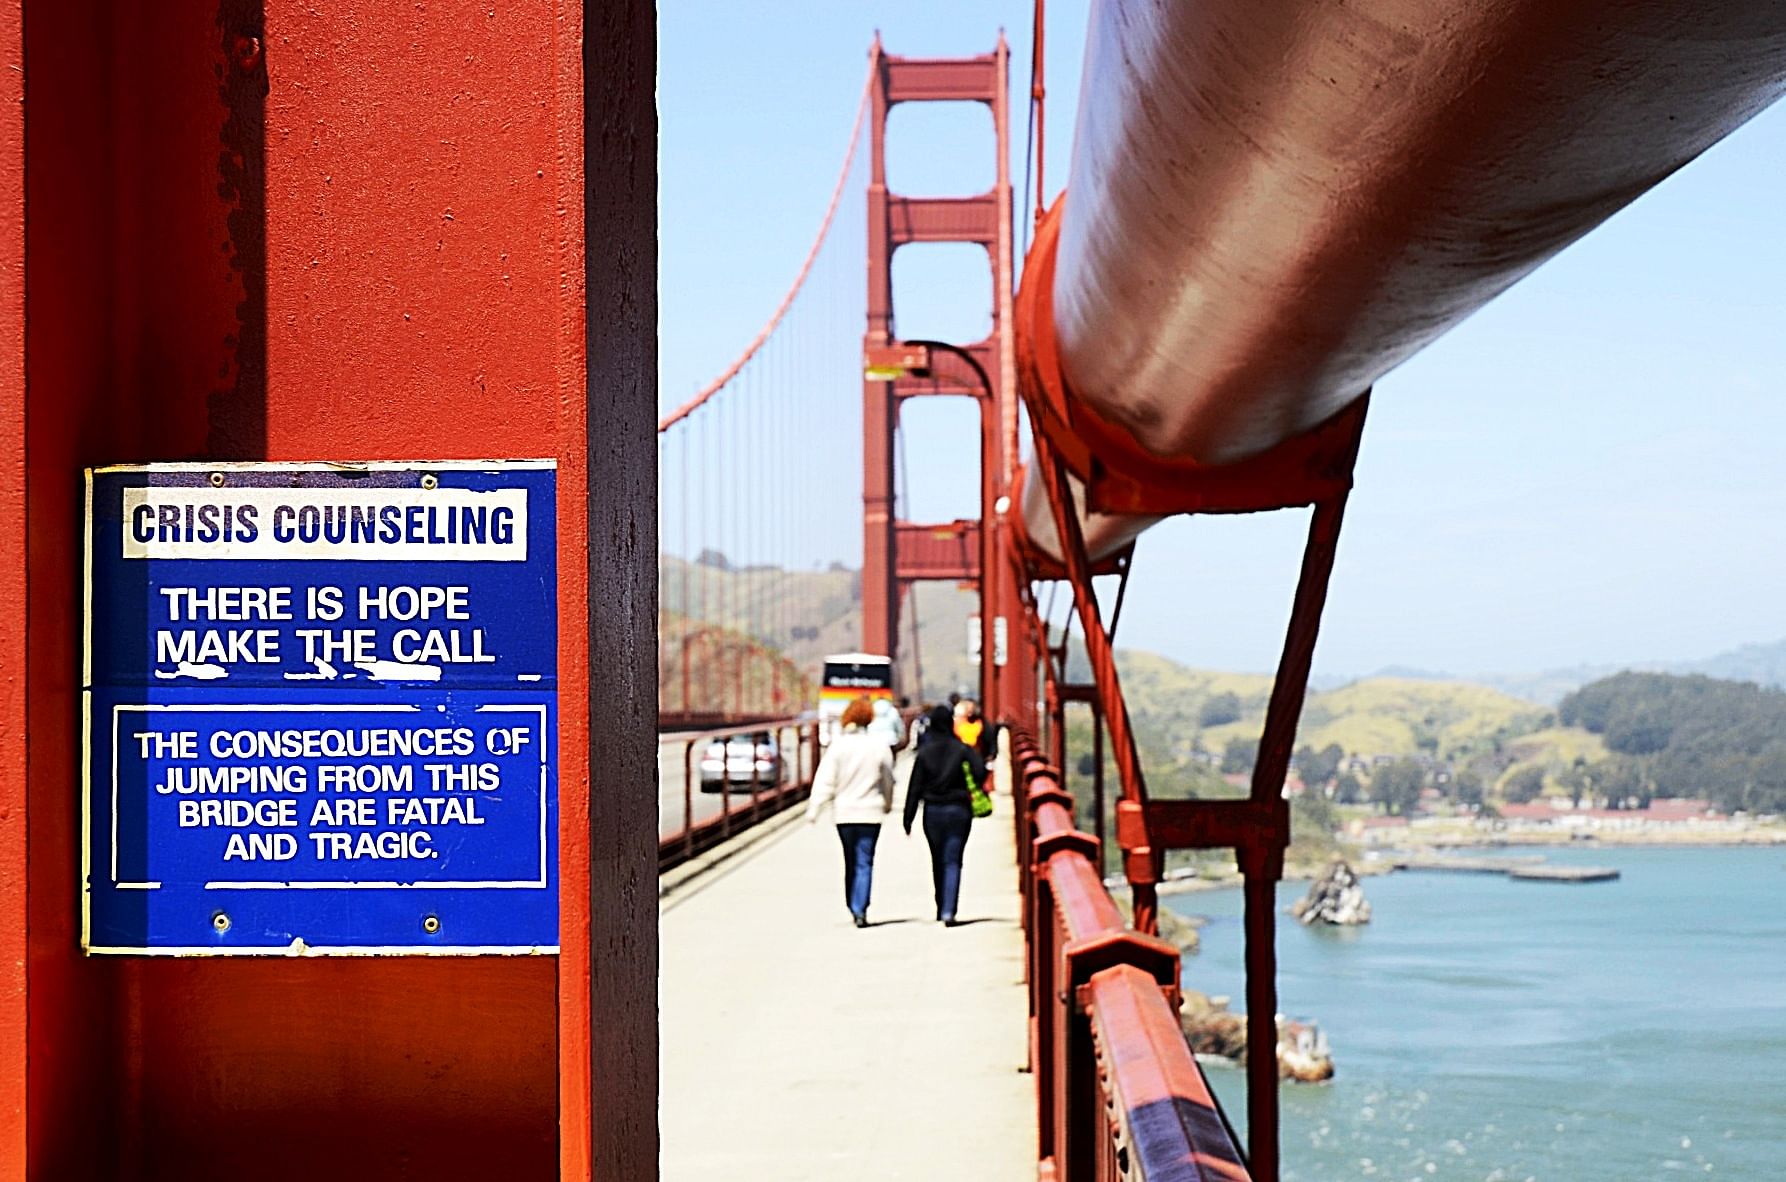 Golden Gate Bridge finally installs anti-suicide nets after years of delay, News